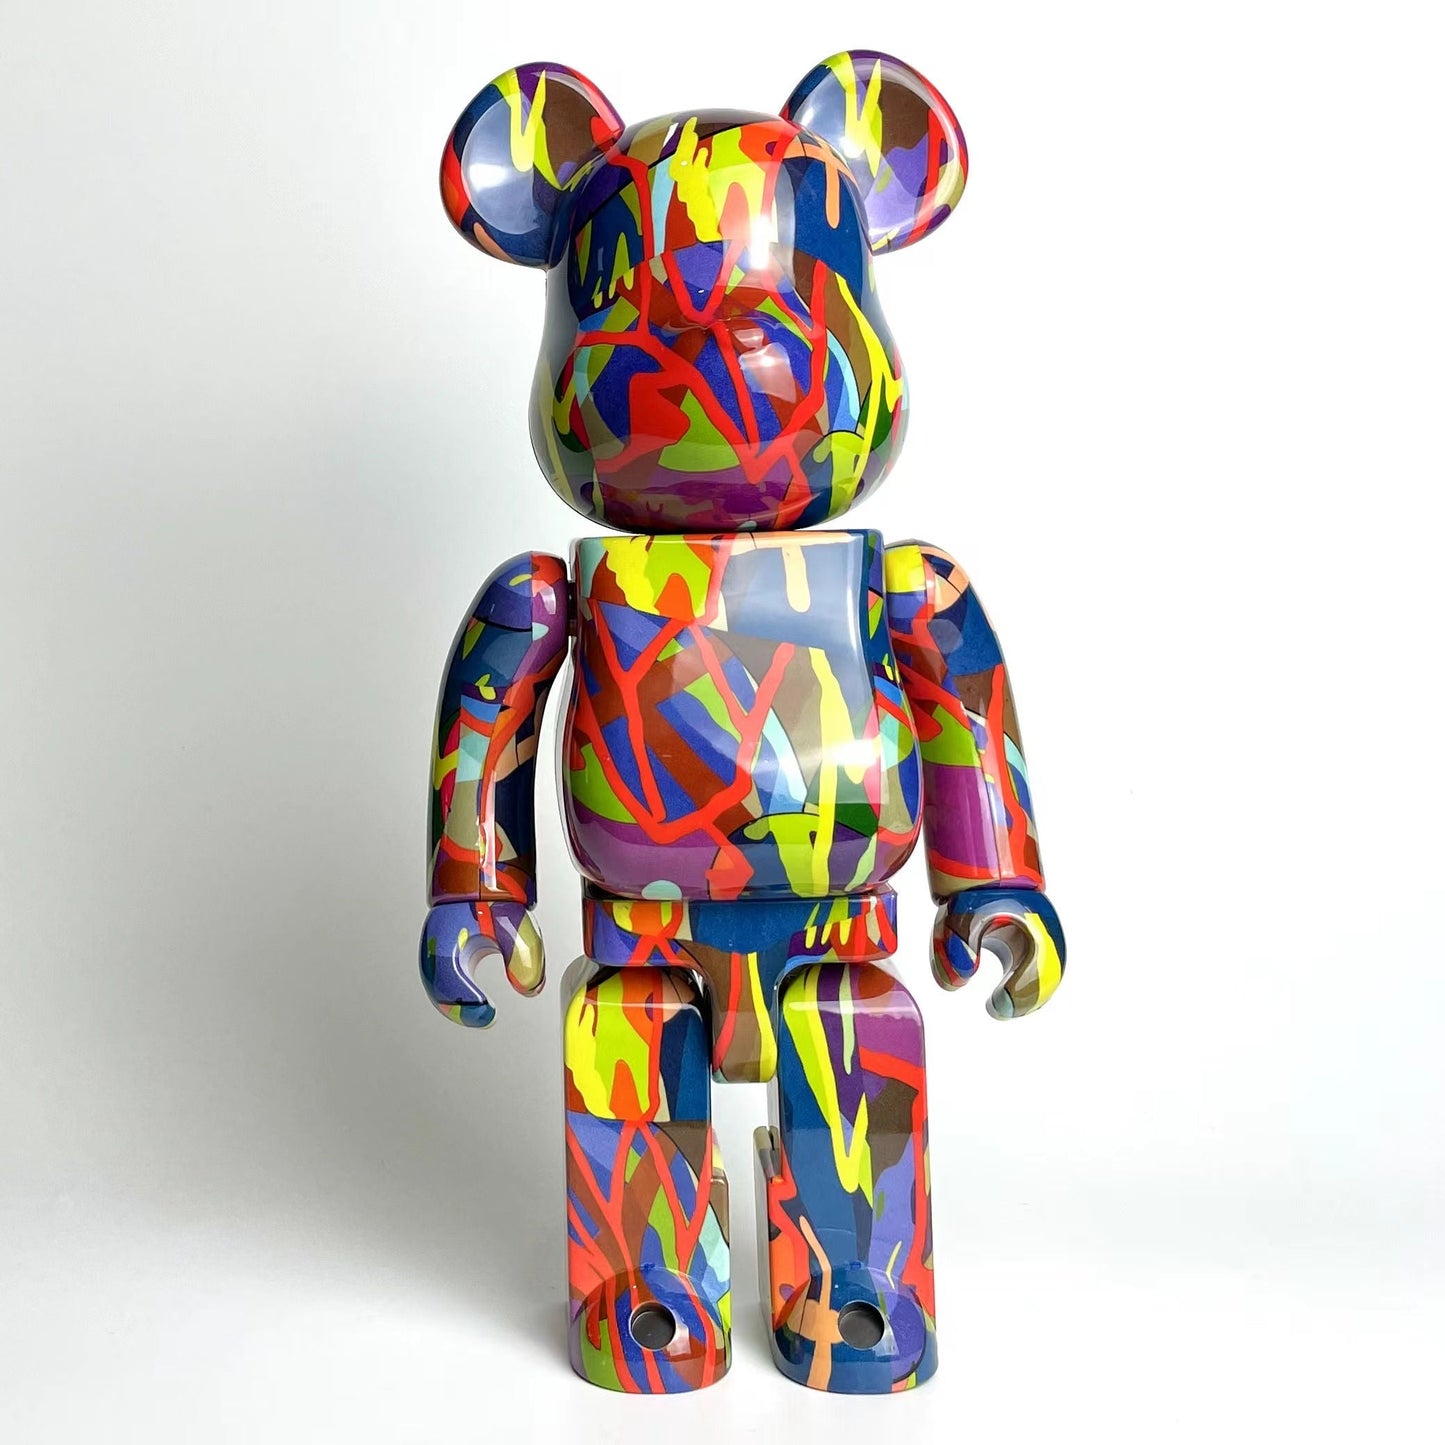 Toy - 28cm BEARBRICK 400% TENSION ABS Action Figure Boxed